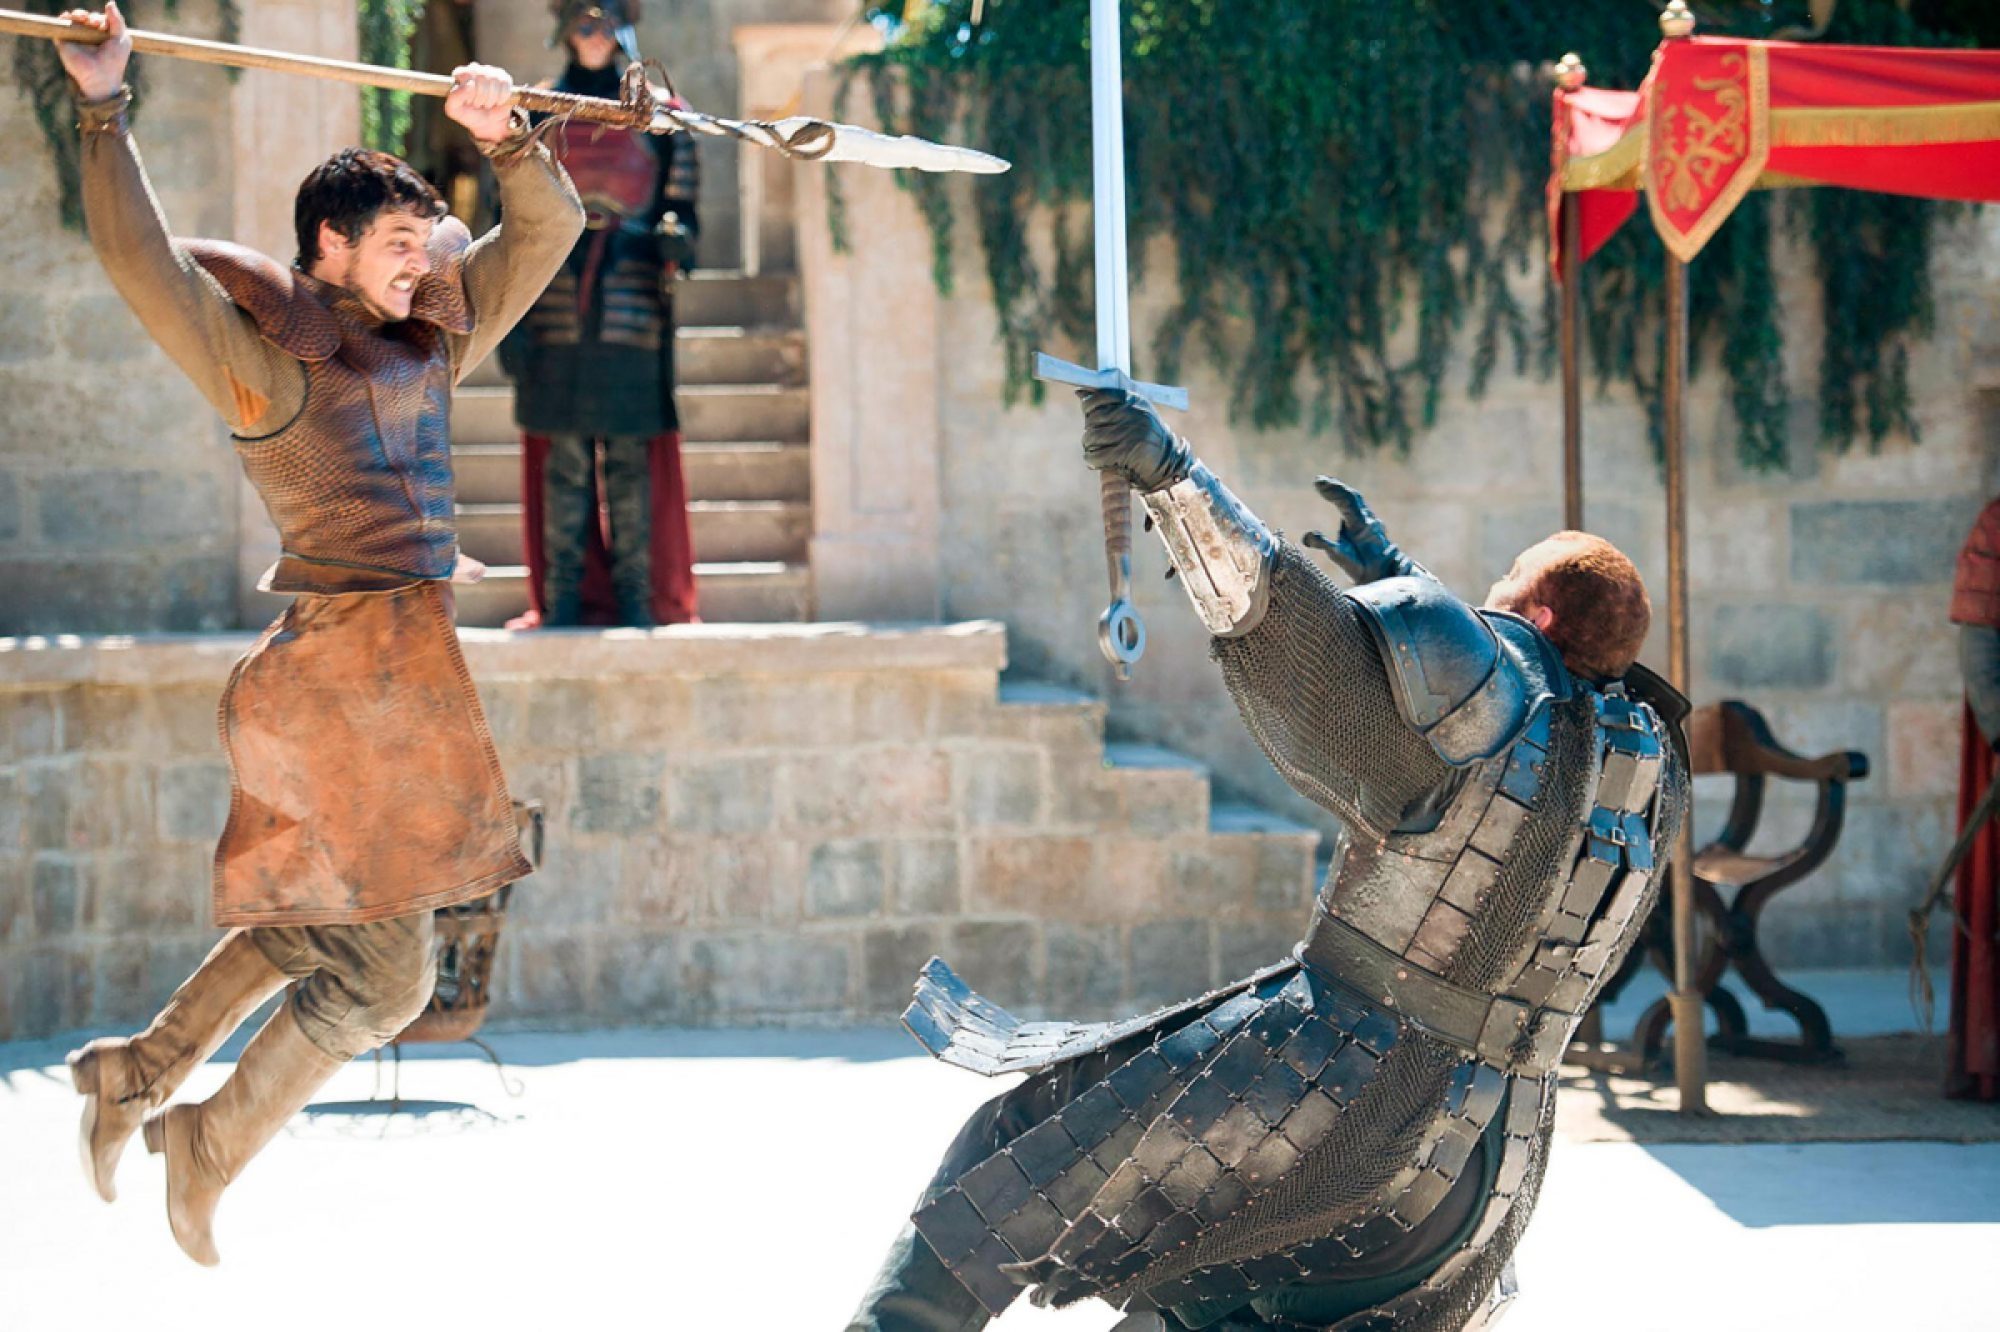 Oberyn Martell and Gregor Clegane fight in a trial by combat during Game of Thrones' season 4